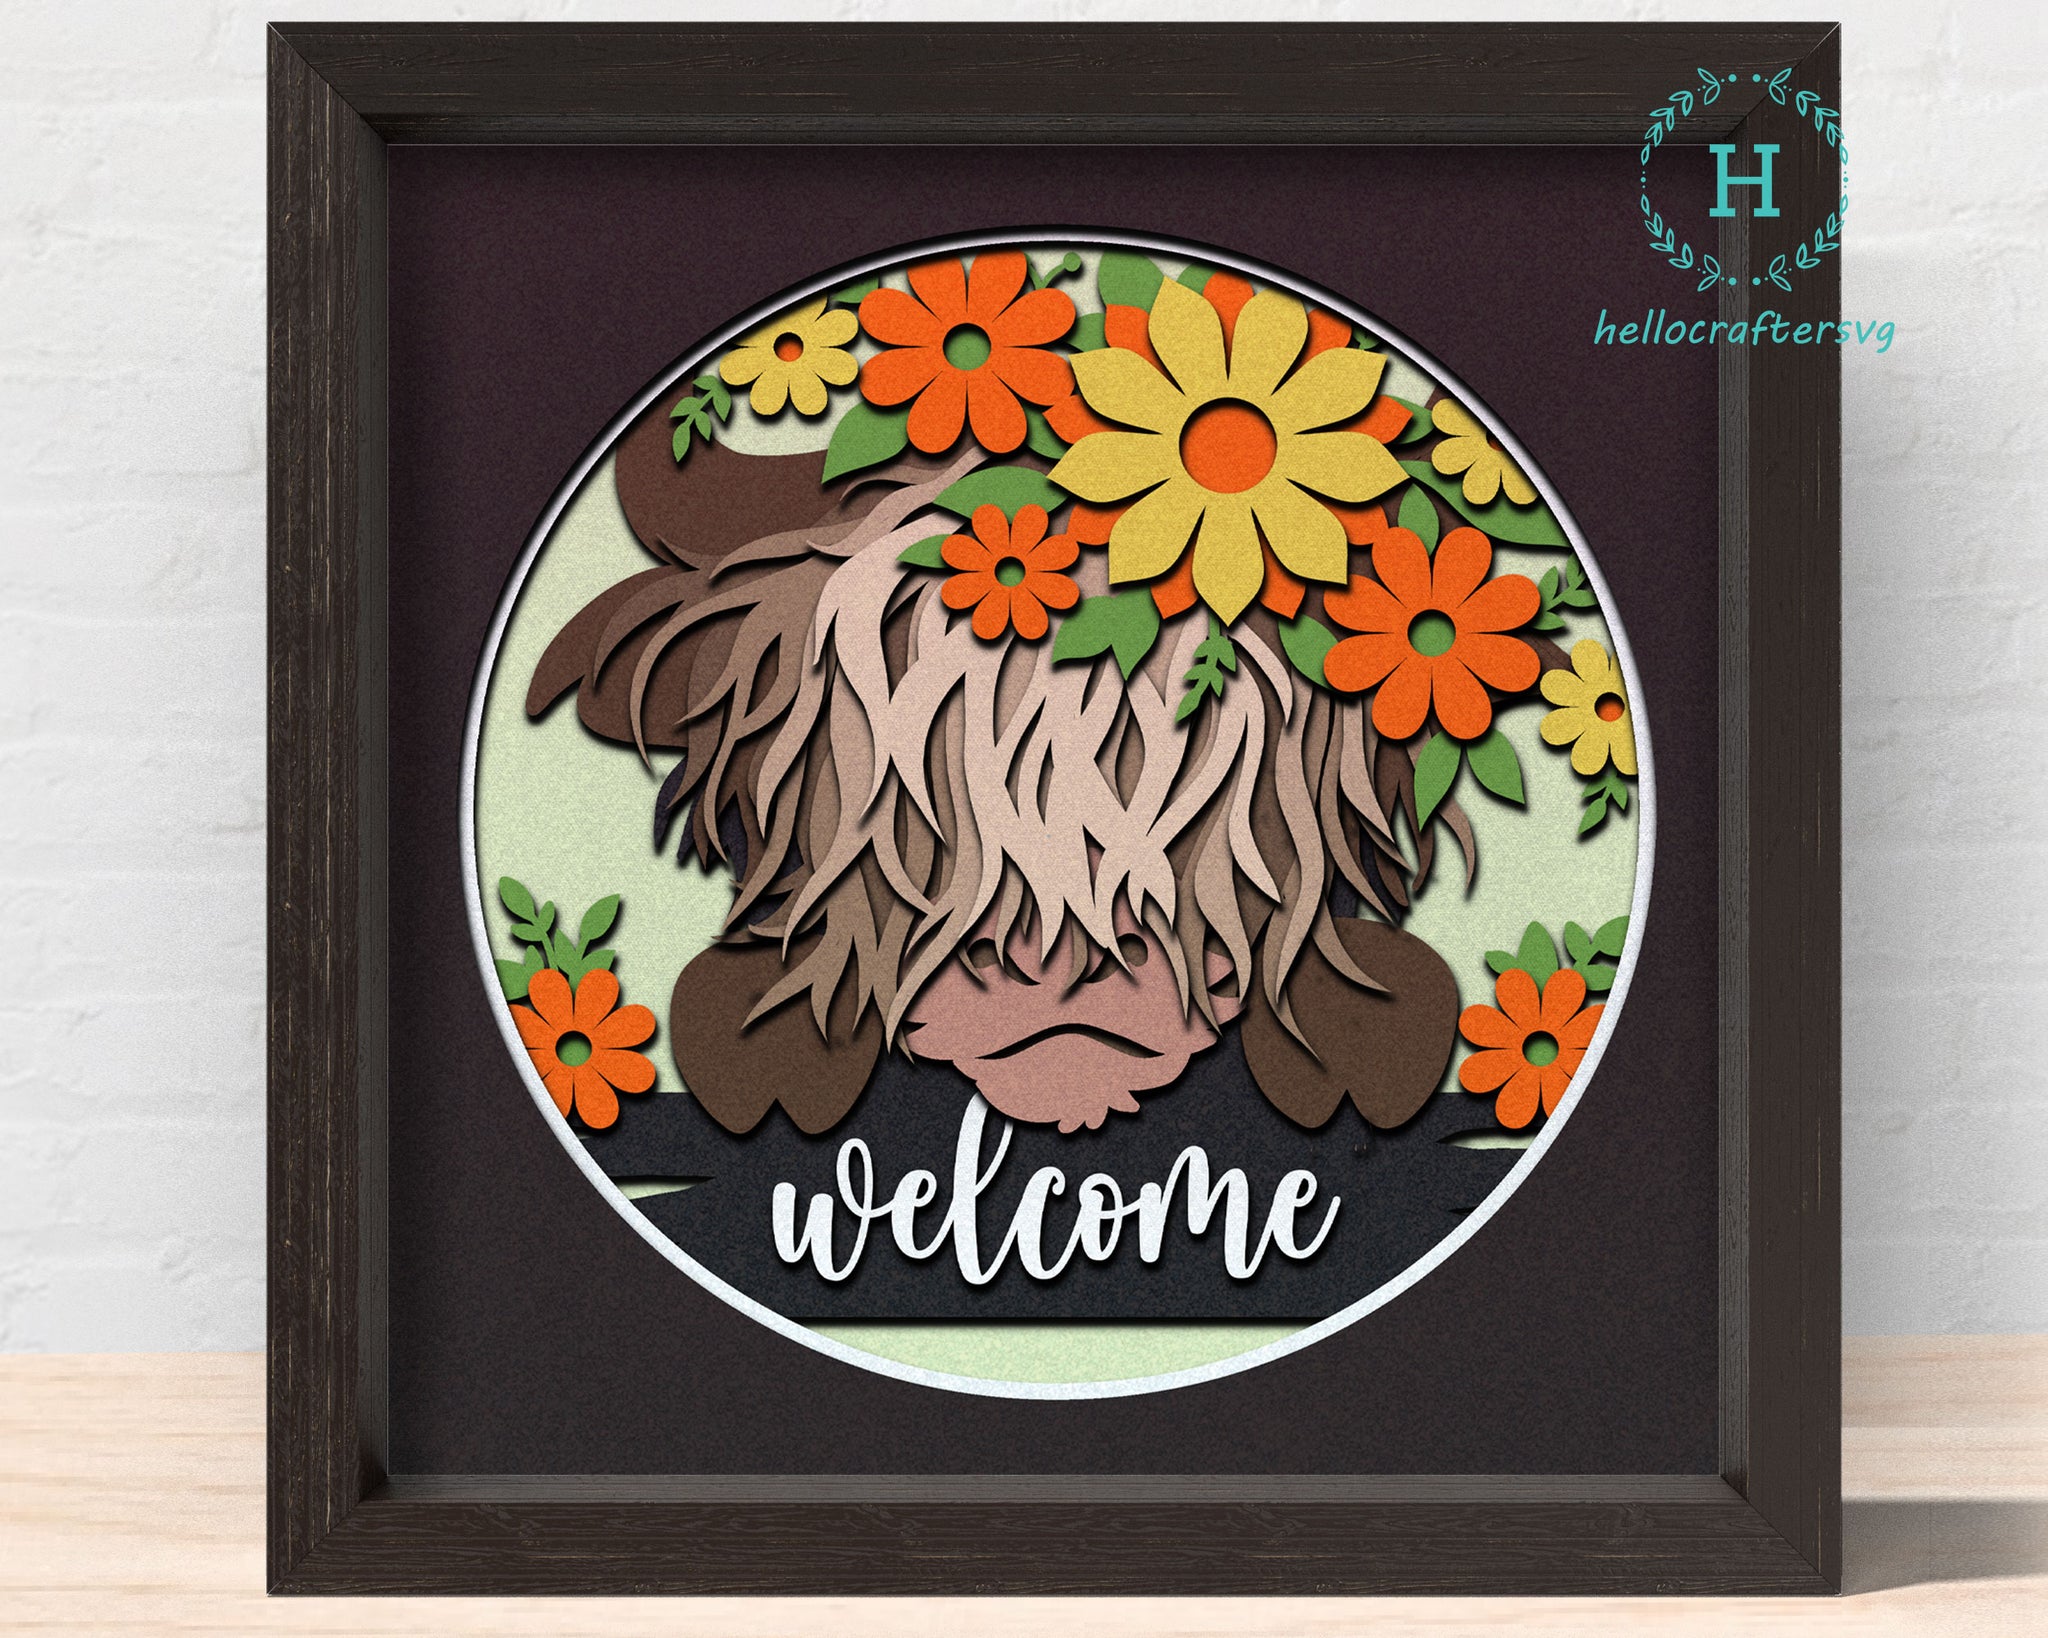 3d WELCOME HIGHLAND COW Svg, Welcome Cow Shadow Box Svg - Cricut Files, Cardstock Svg, Silhouette Files - HelloCrafterSvg-112